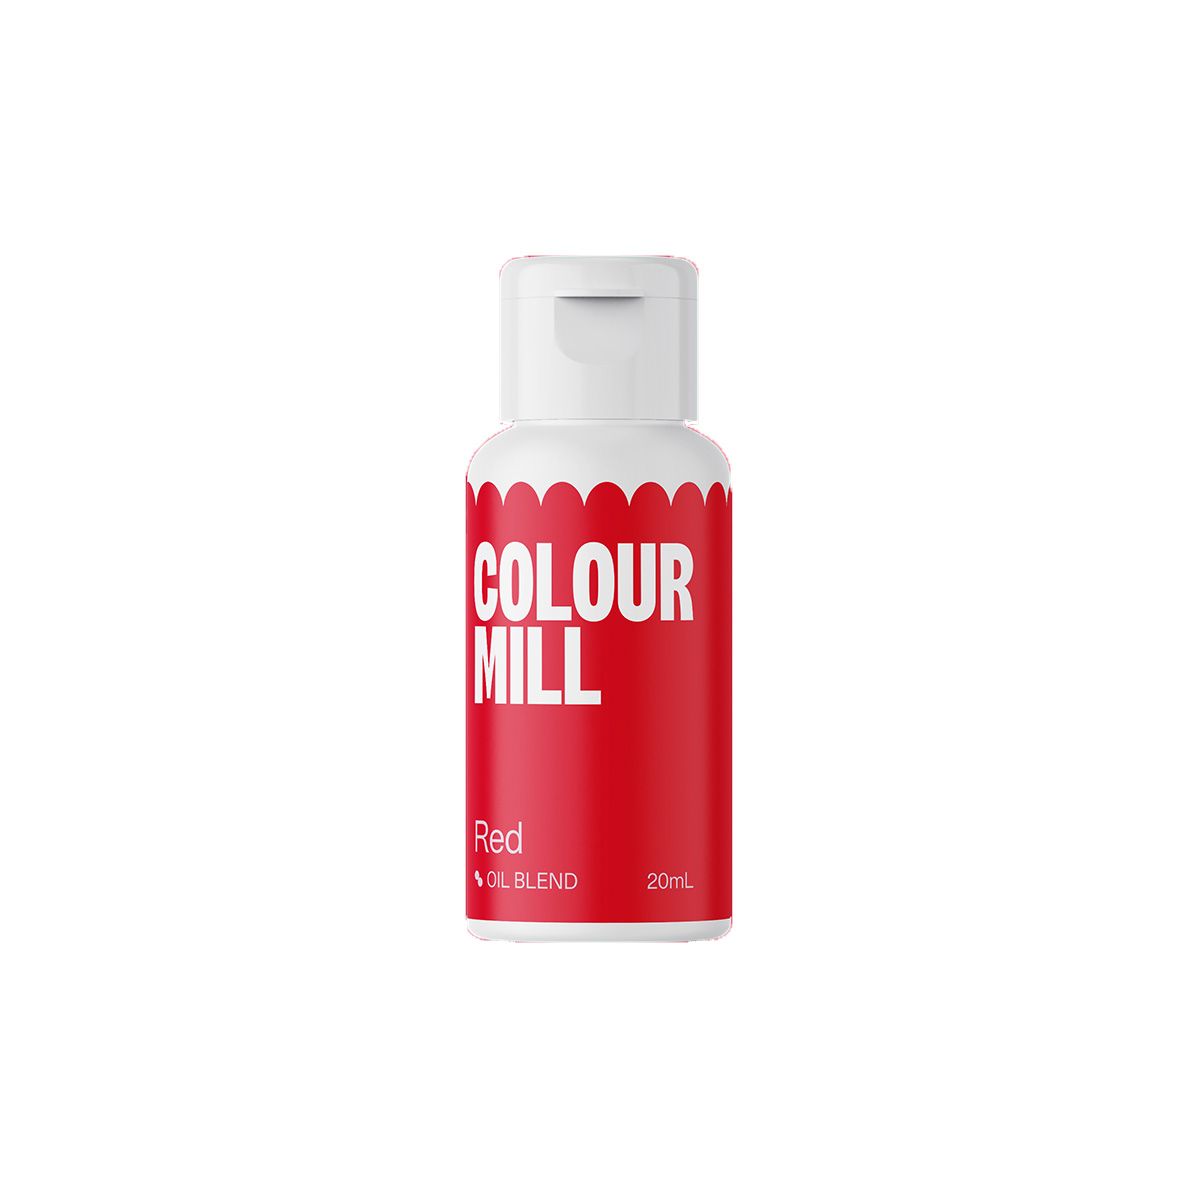  Foto: COLOUR MILL OIL BLEND RED 20 ML